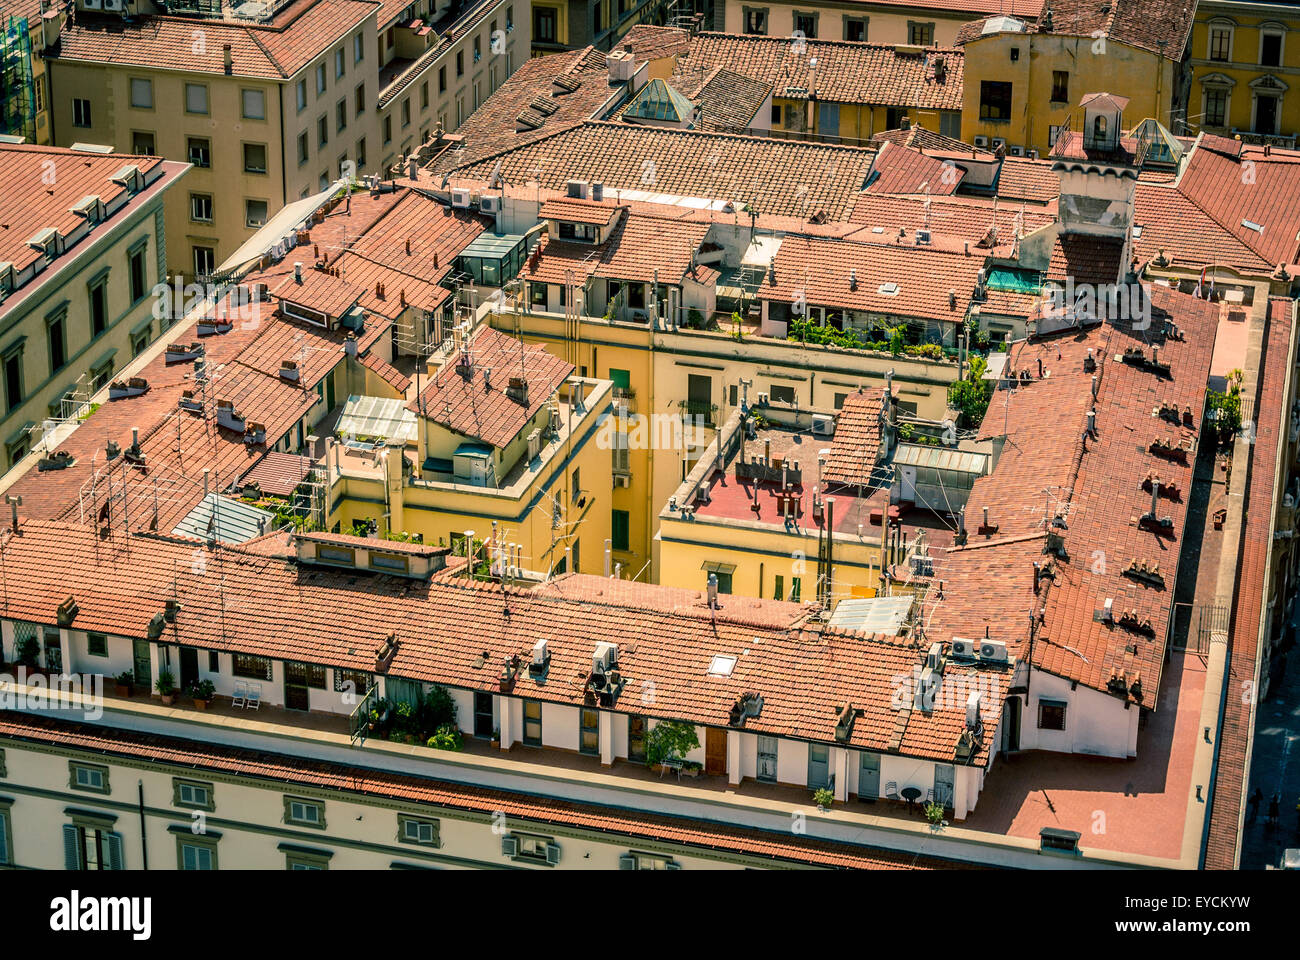 Terracotta rooftops of traditional Florentine buildings. Florence, Italy. Stock Photo